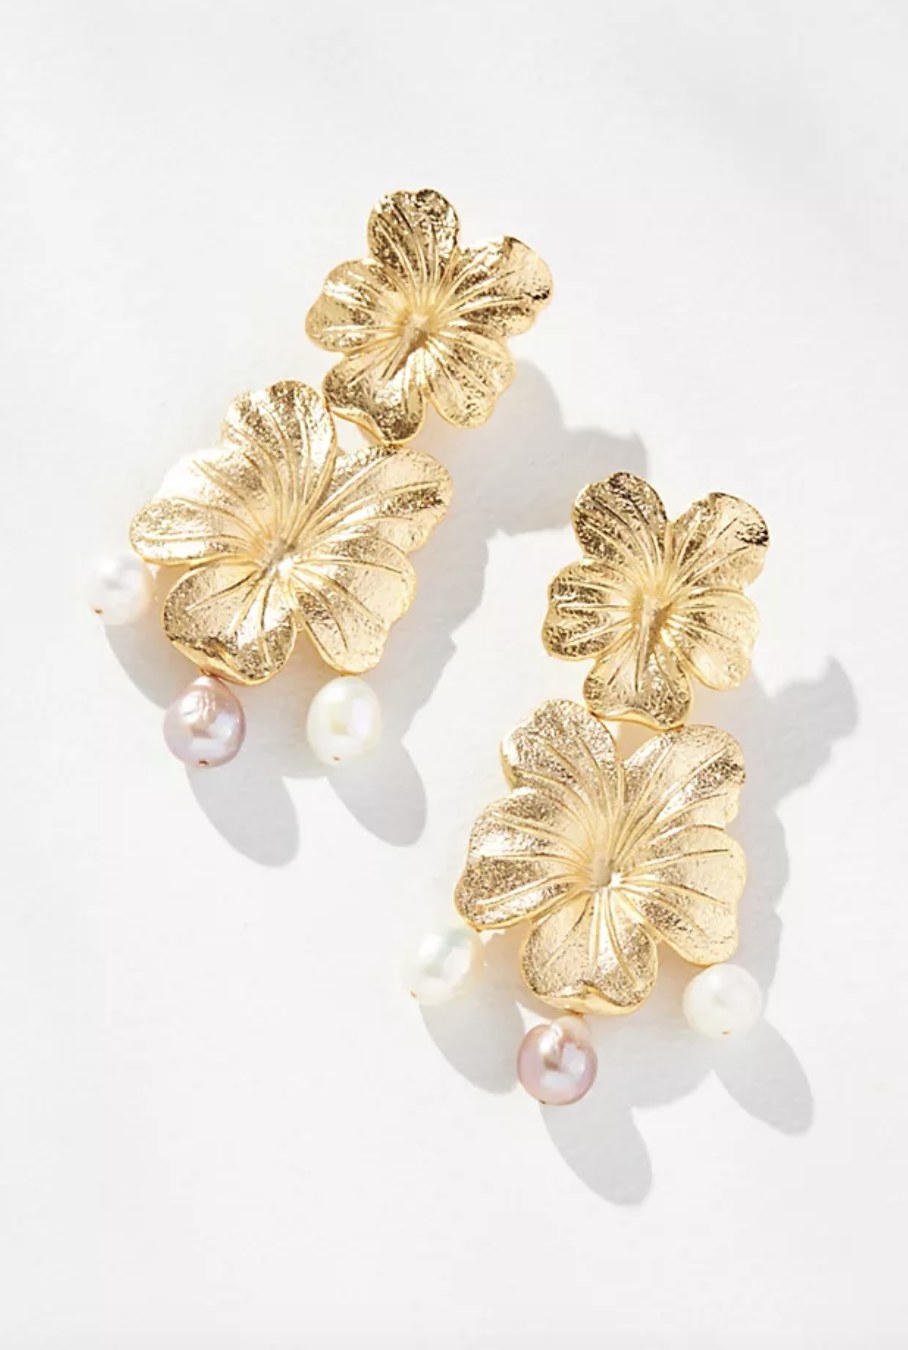 The gold earrings have two gold floral accents and three freshwater pearls on each one